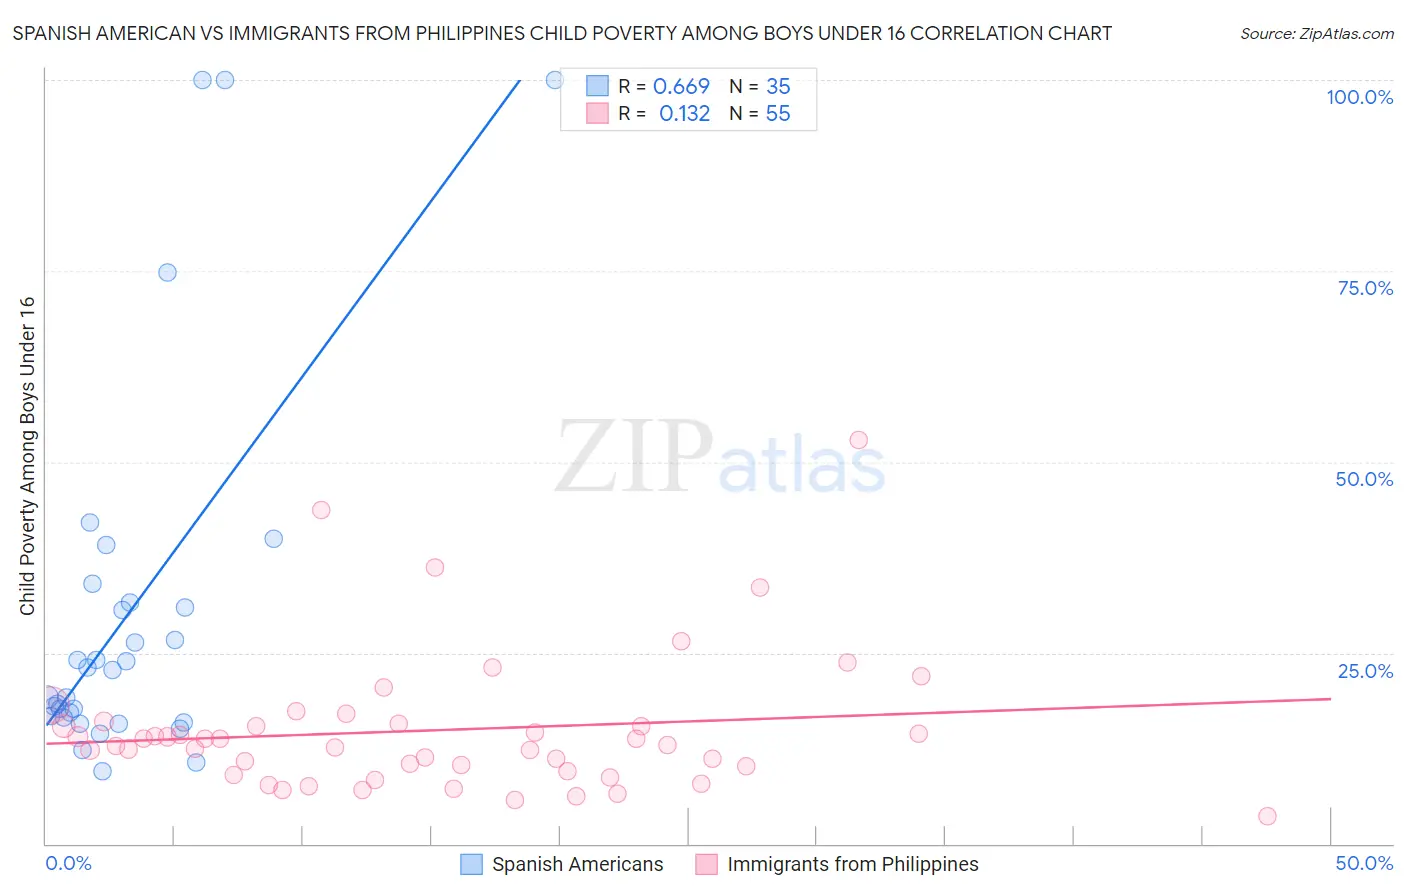 Spanish American vs Immigrants from Philippines Child Poverty Among Boys Under 16